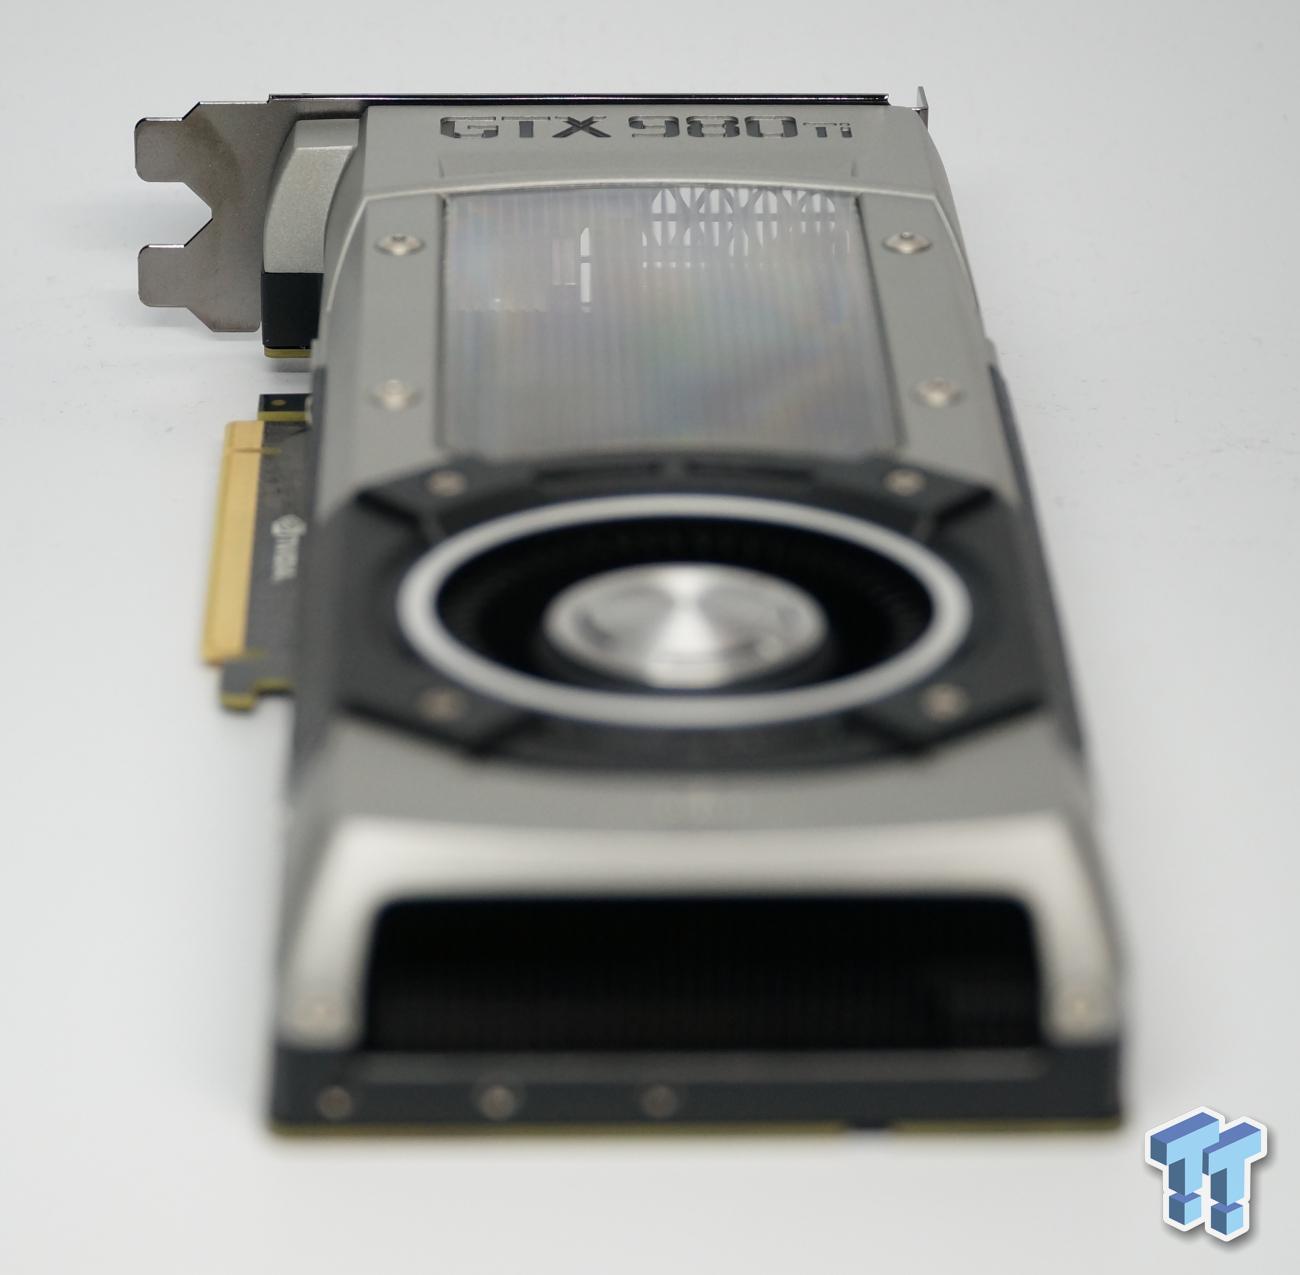 NVIDIA GeForce GTX 980 Ti Reference Video Card Review